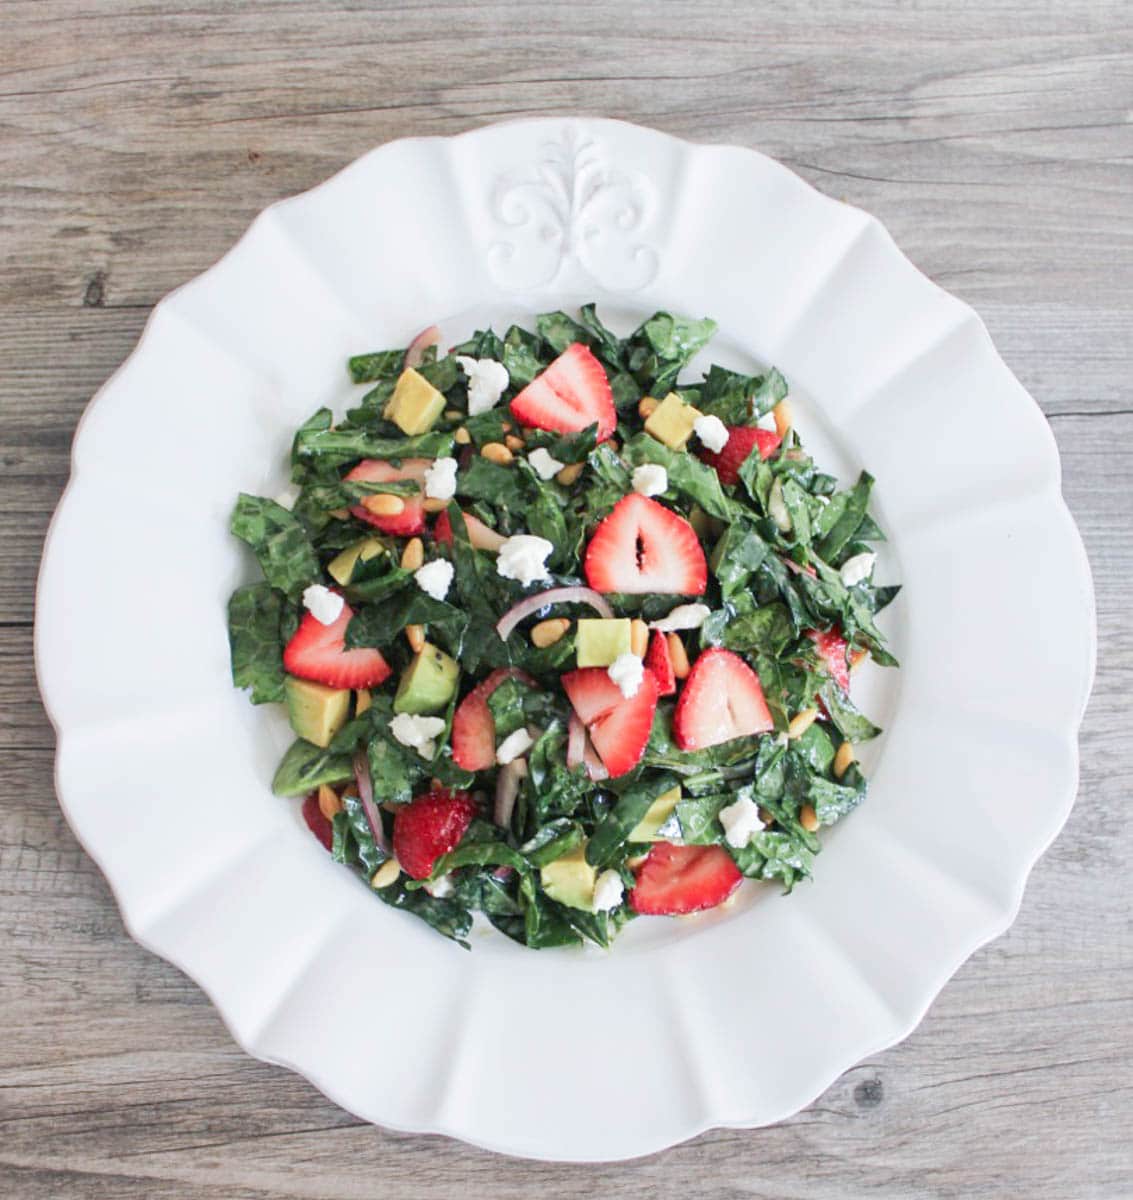 Summer-Kale-Salad-with-Strawberries-Avocado-Pine-Nuts-and-Goat-Cheese-9